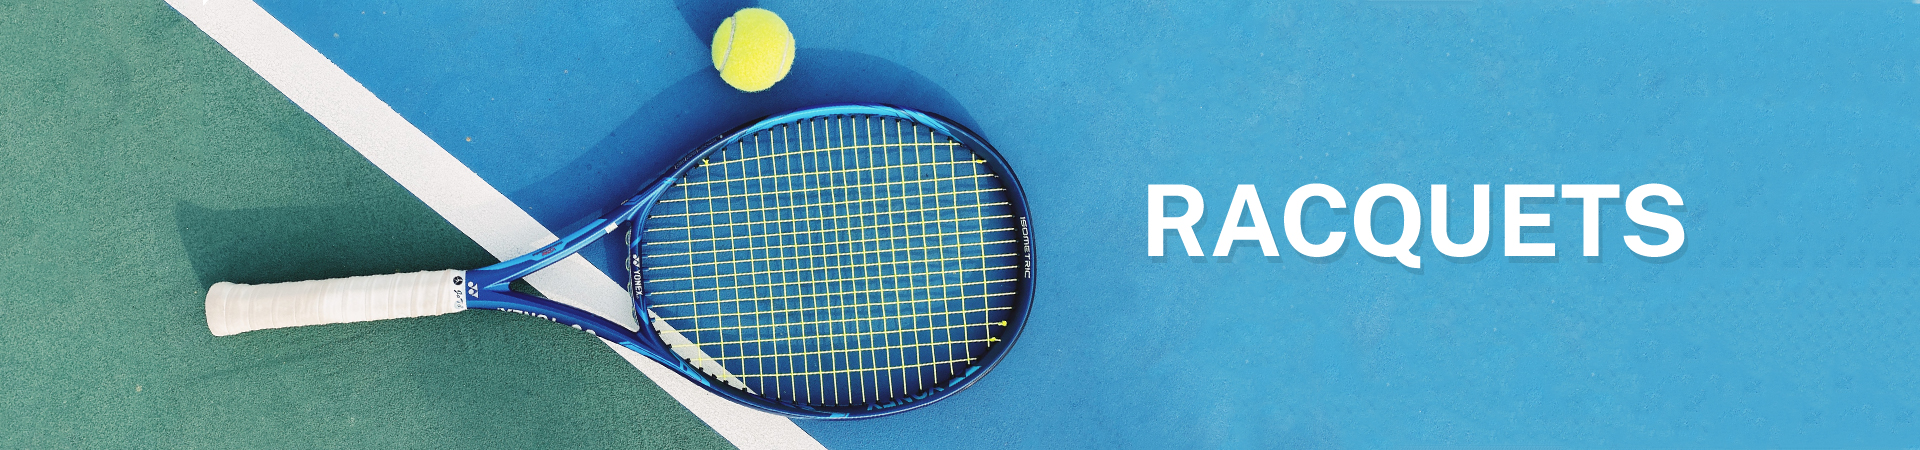 Tennis Racquet Buy Online - Enhance Your Performance with Tennishub.in